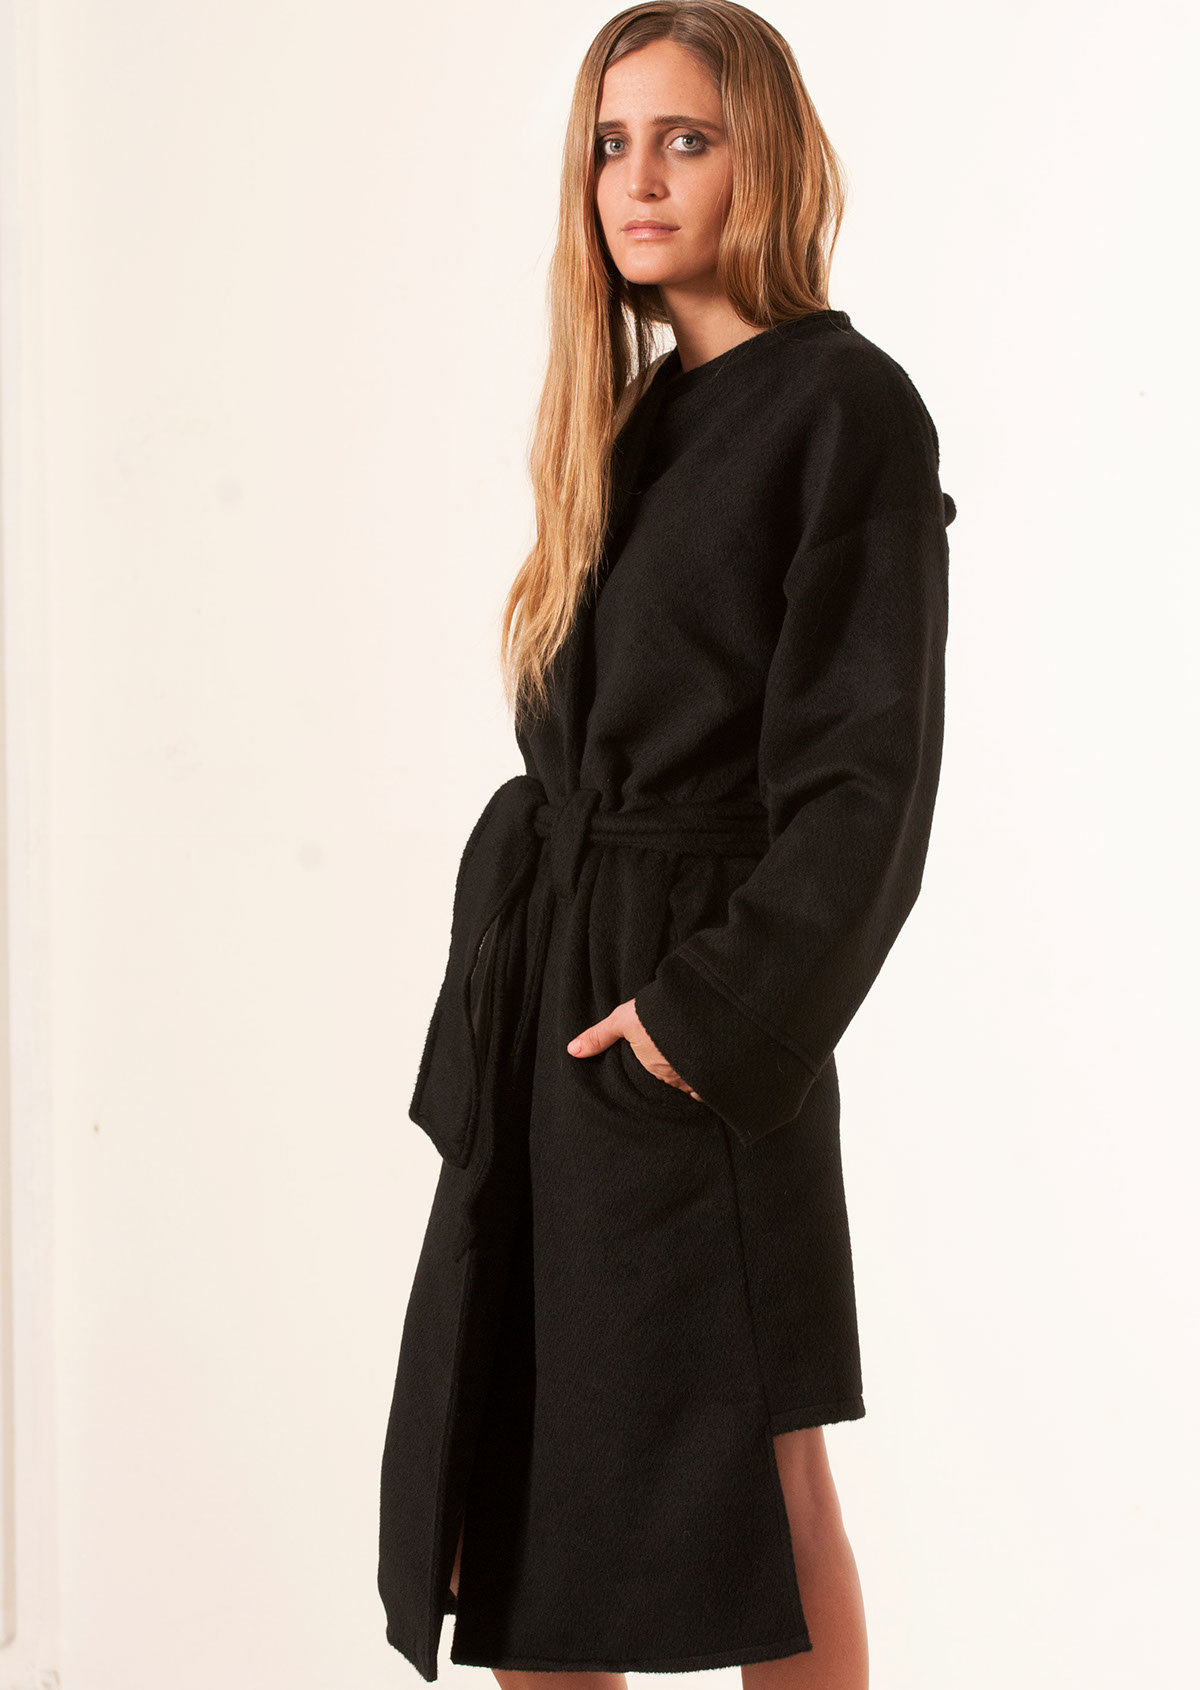 winter Collection Clothing design wool Lookbook cotton leather black readytowear